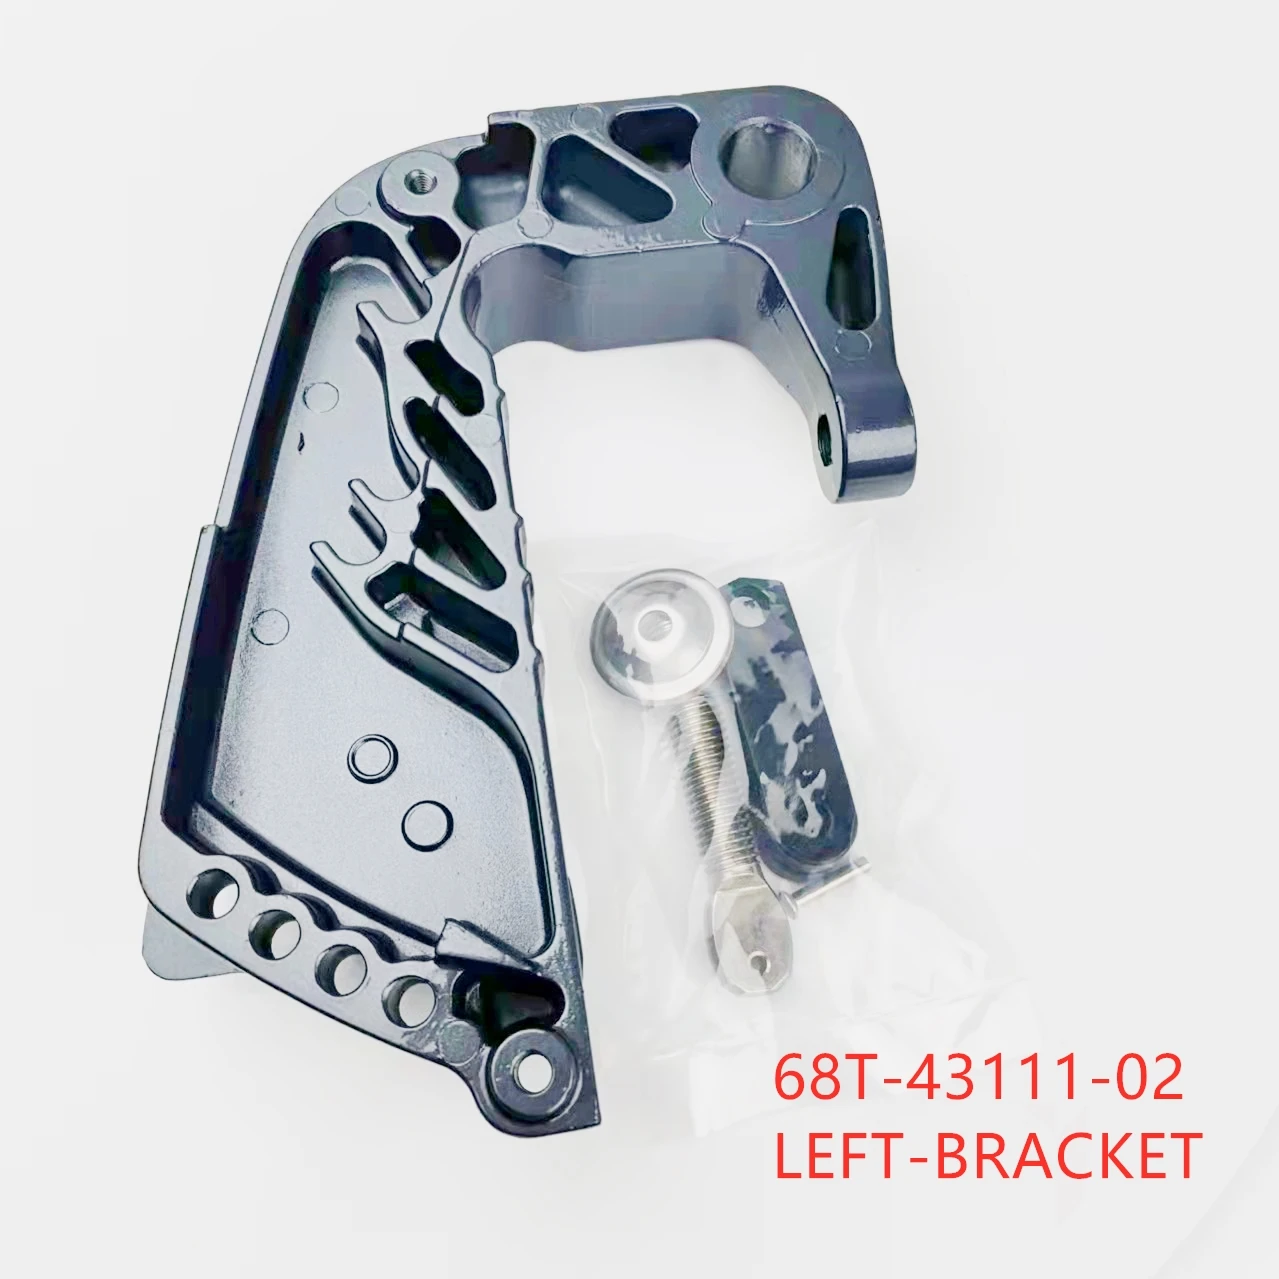 68T-43111-02-4D Right Bracket Clamp For Yamaha Outboard Motor 4T F8C; F6A;68R 69F 68T Series Engines Parsun HDX 68T-43111 крепежный болт sram xx trigger clamp bracket kit right 11 7015 062 010